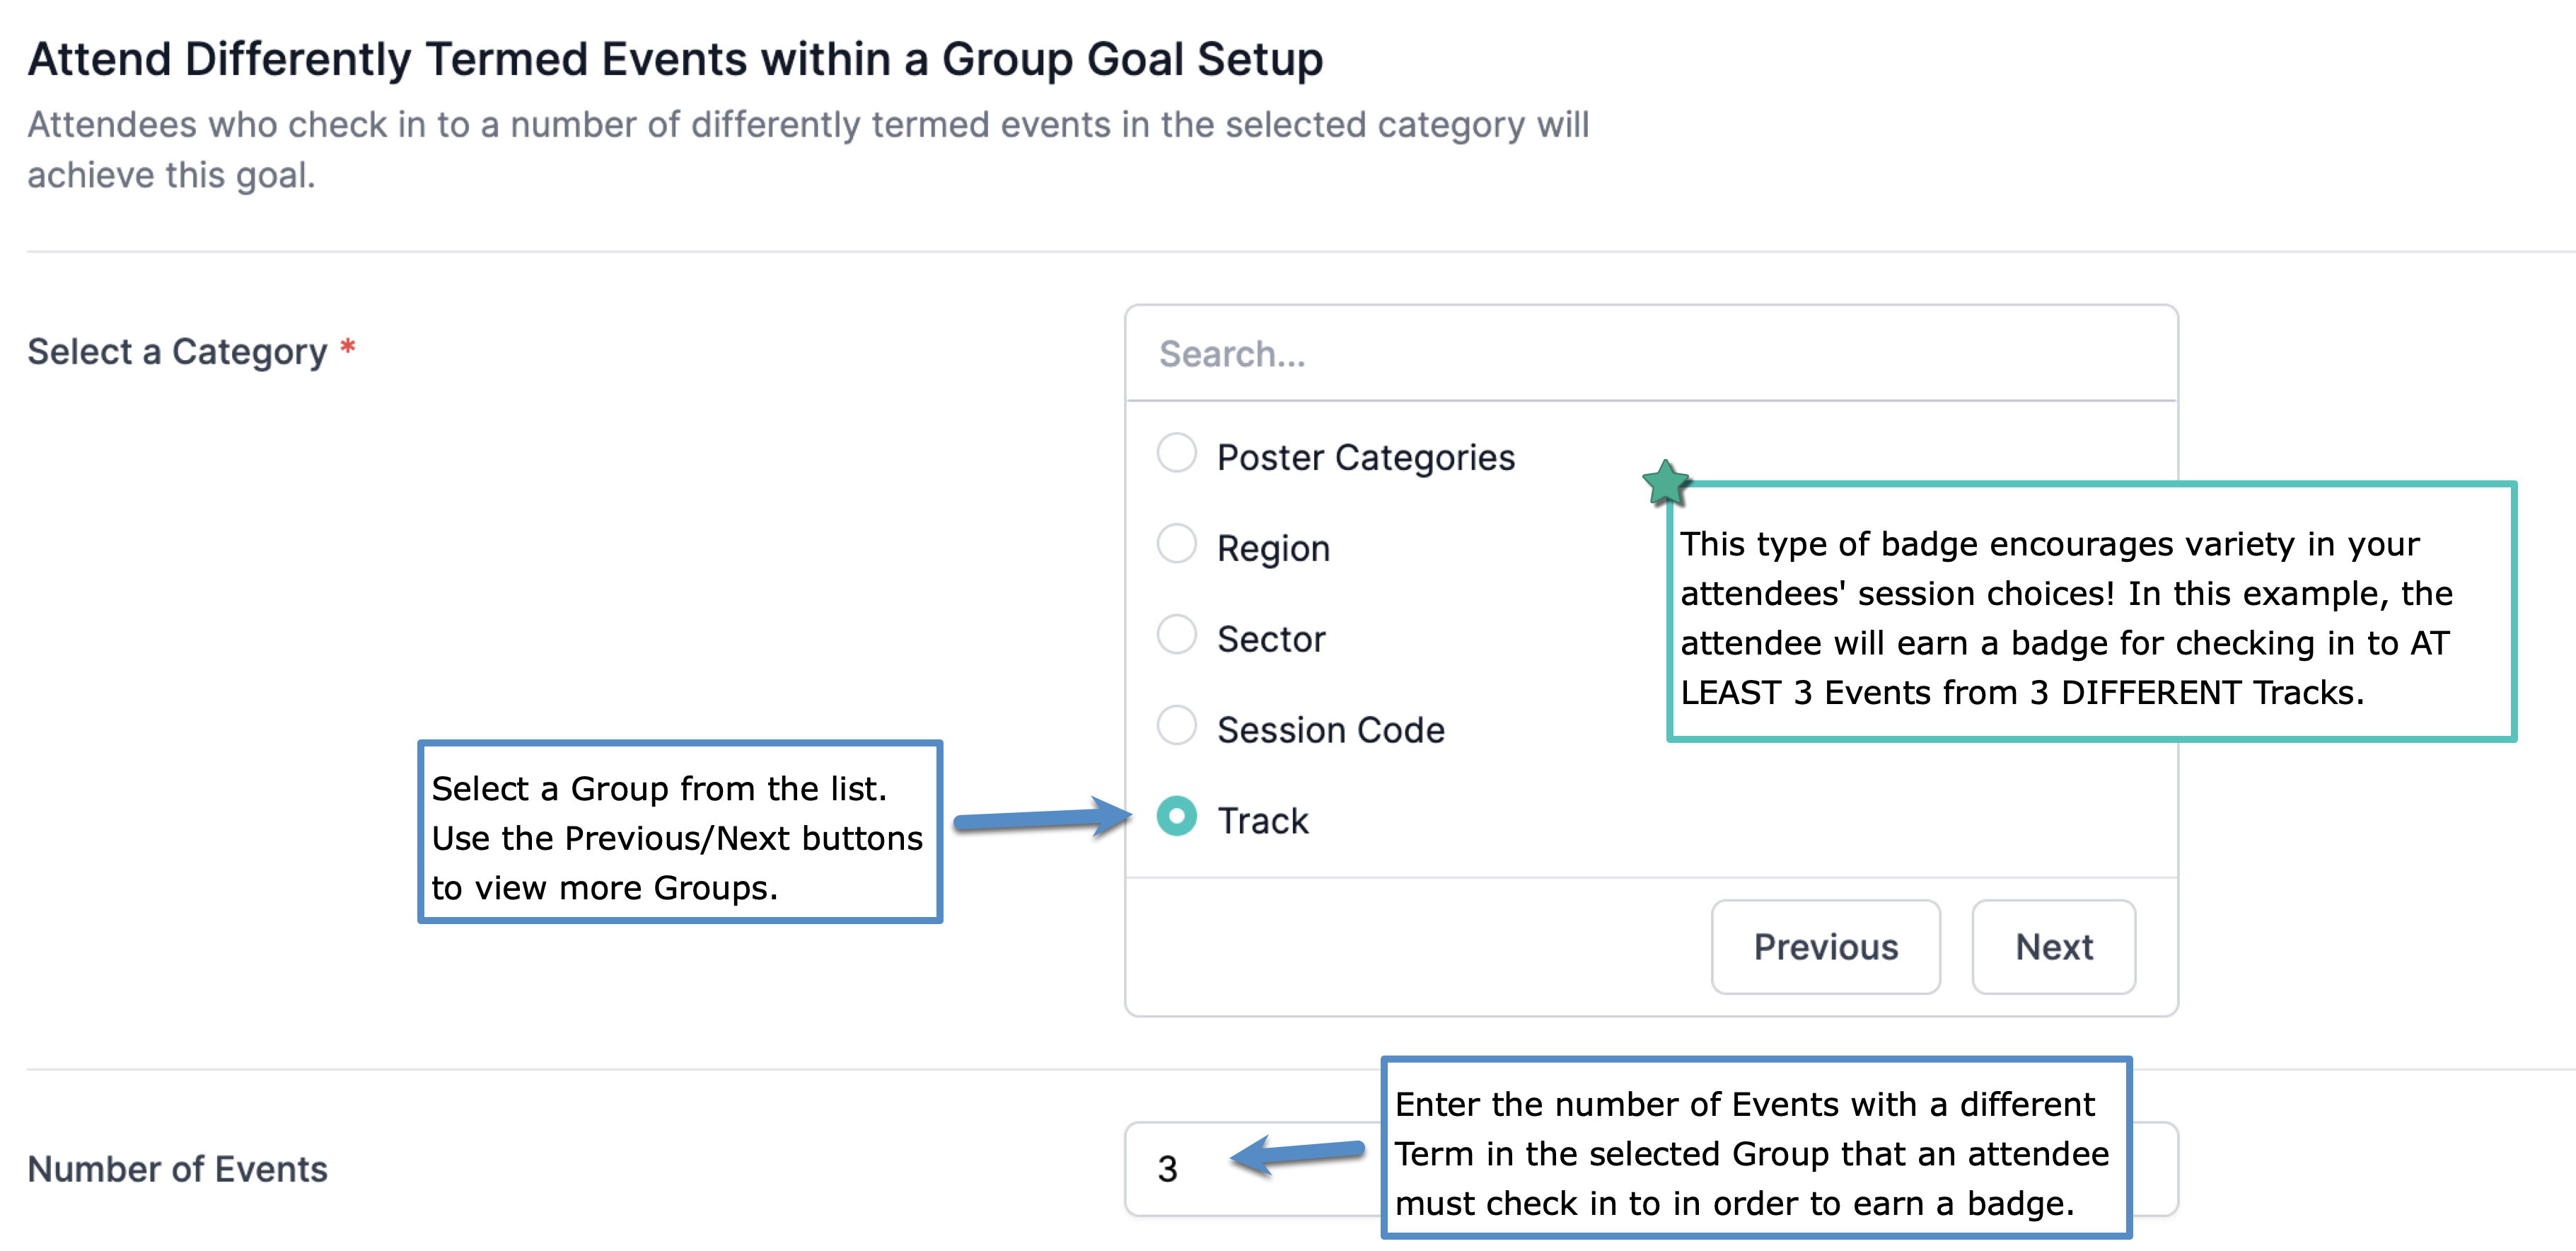 Attend_Differently_Termed_Events_within_a_Group_Goal_Setup.png